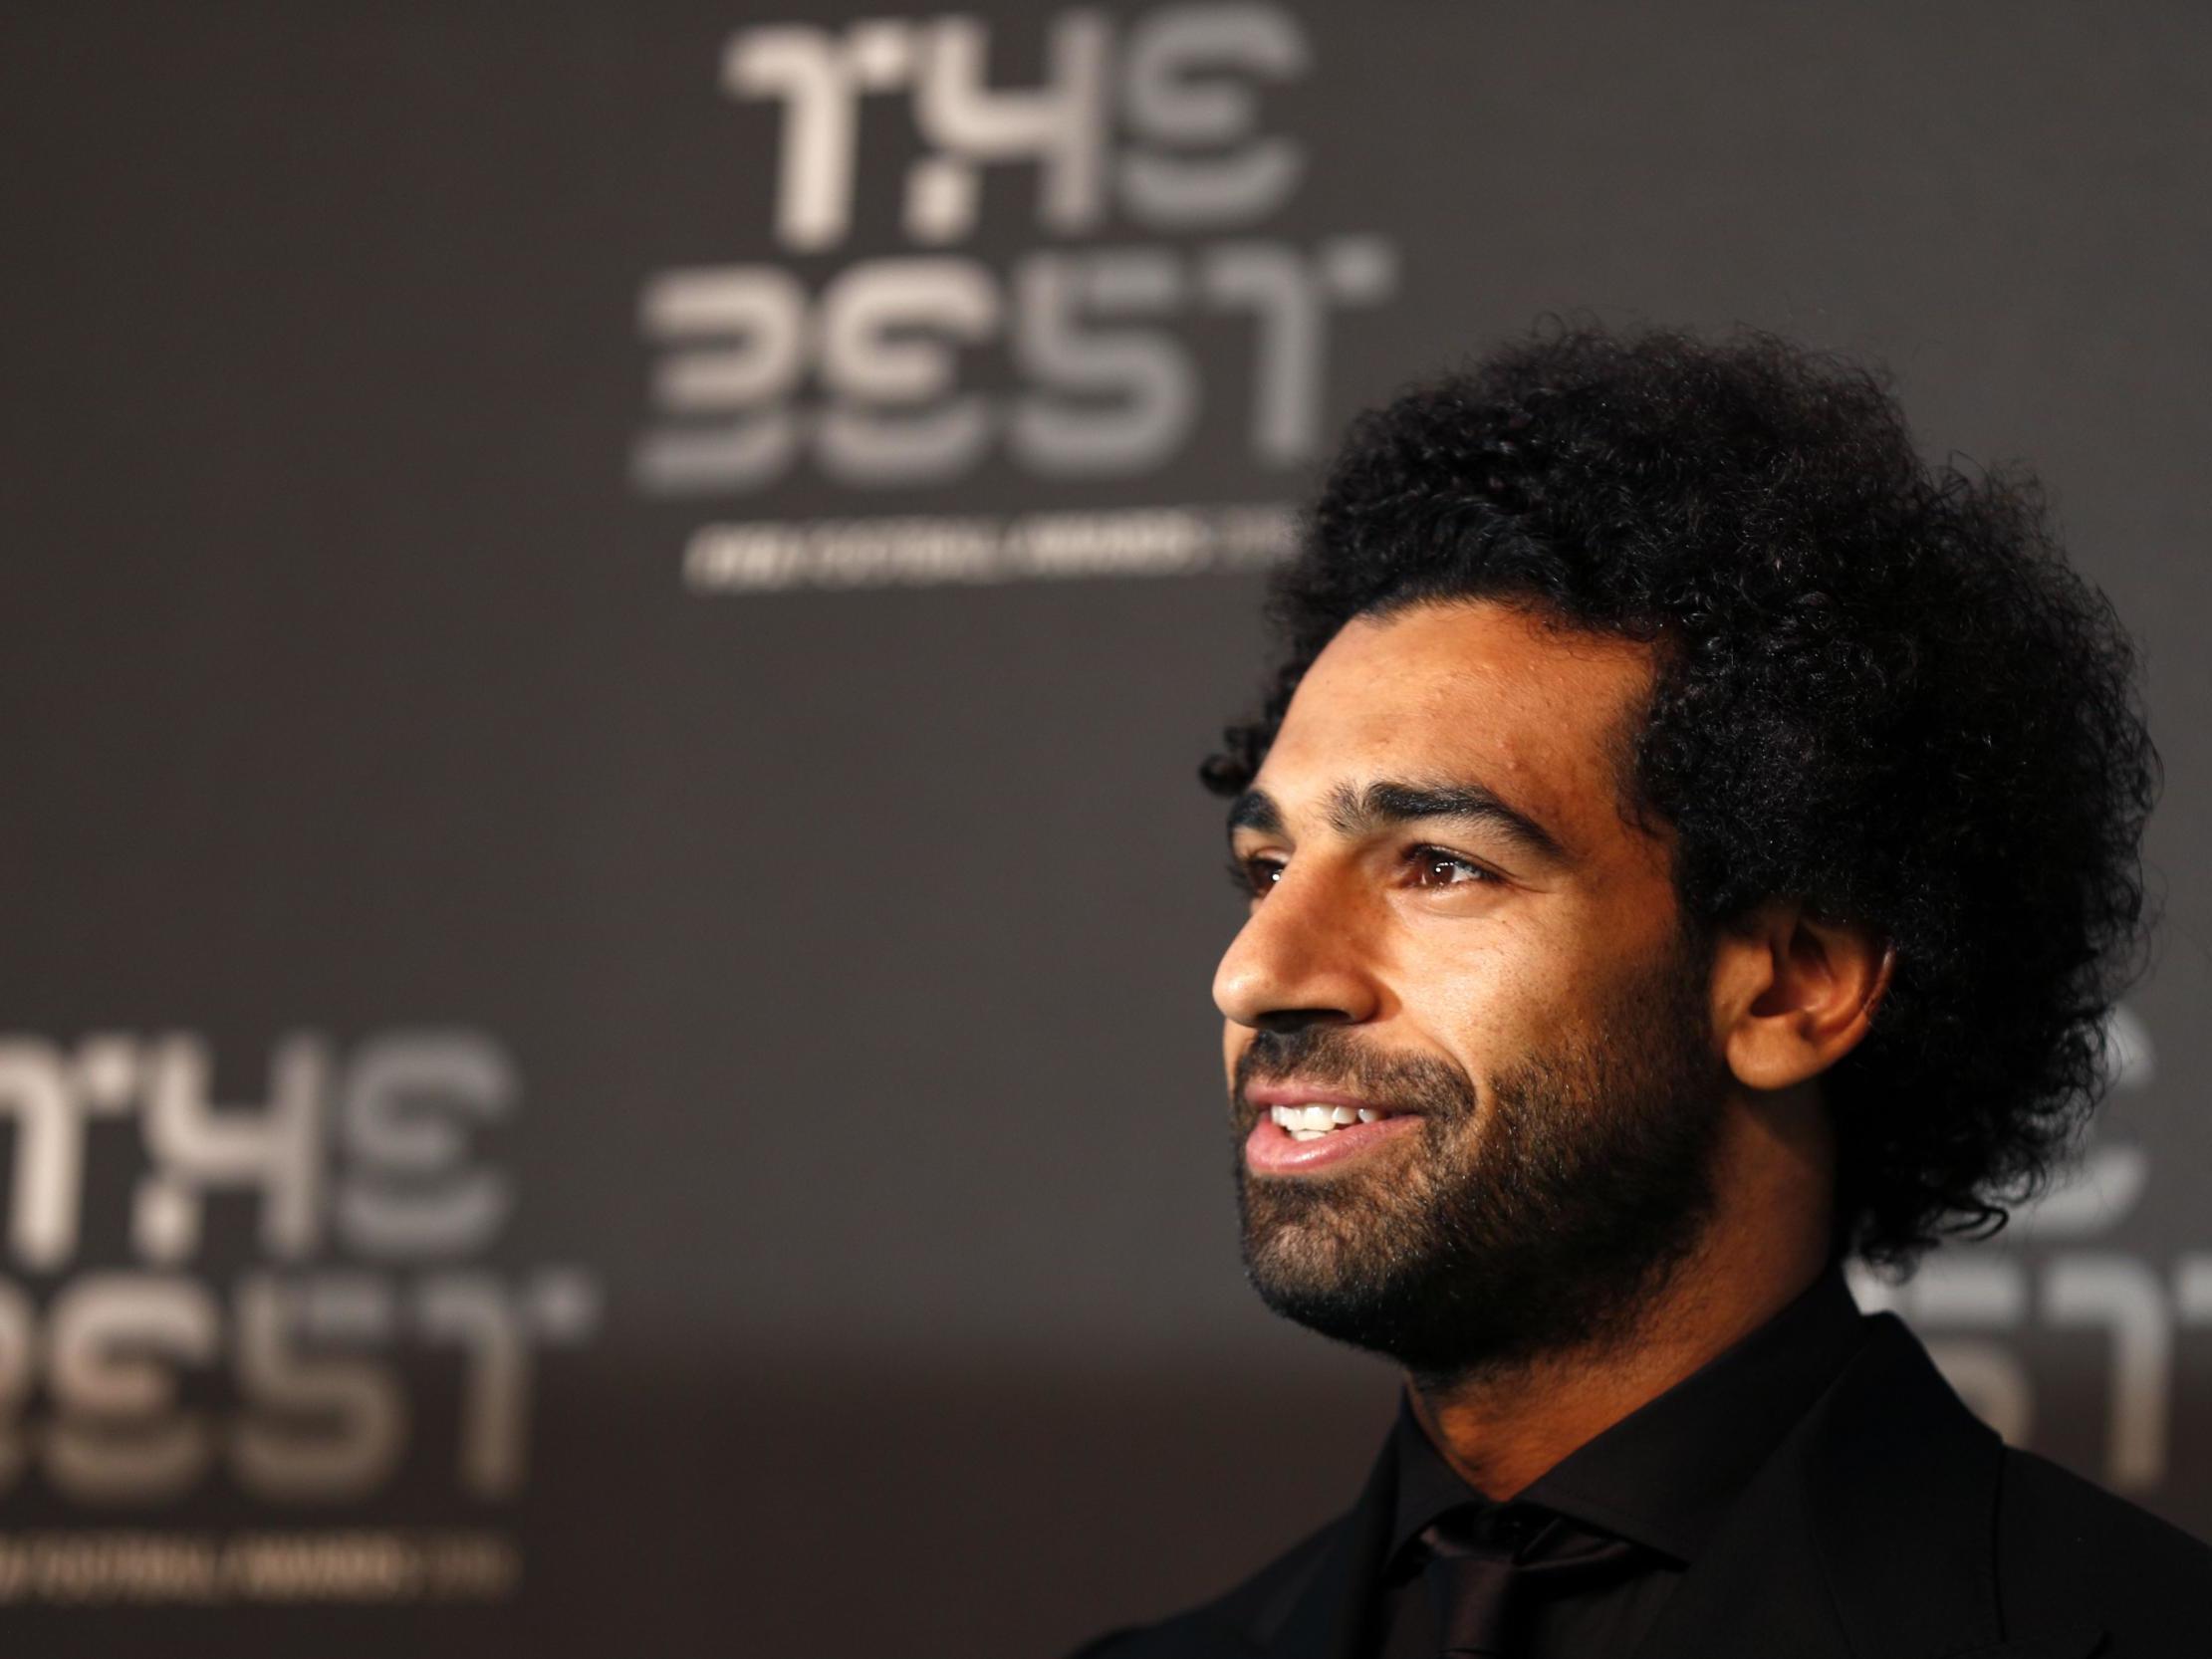 Mohamed Salah also missed out on the player of the year award